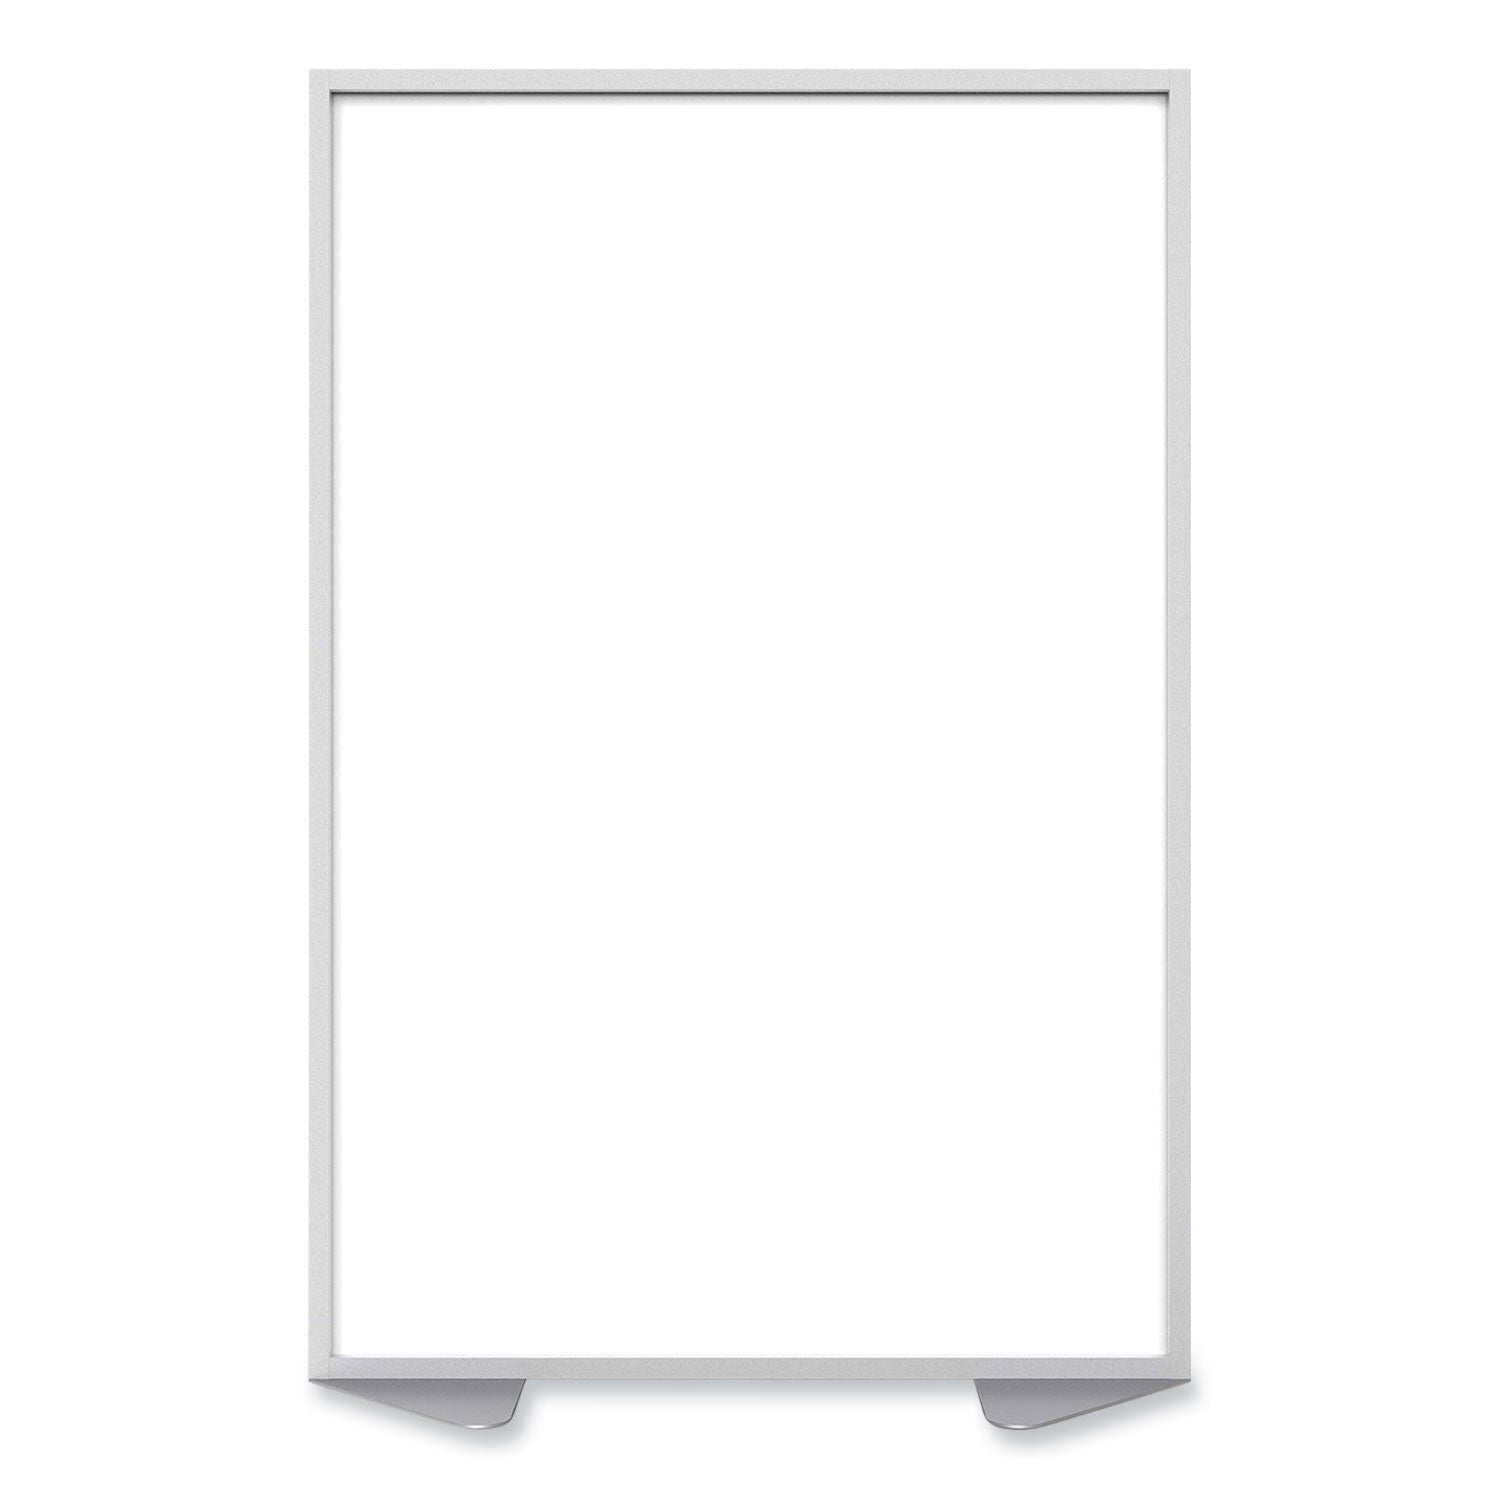 floor-partition-with-aluminum-frame-4806-x-204-x-7186-white-ships-in-7-10-business-days_ghemp724820 - 4